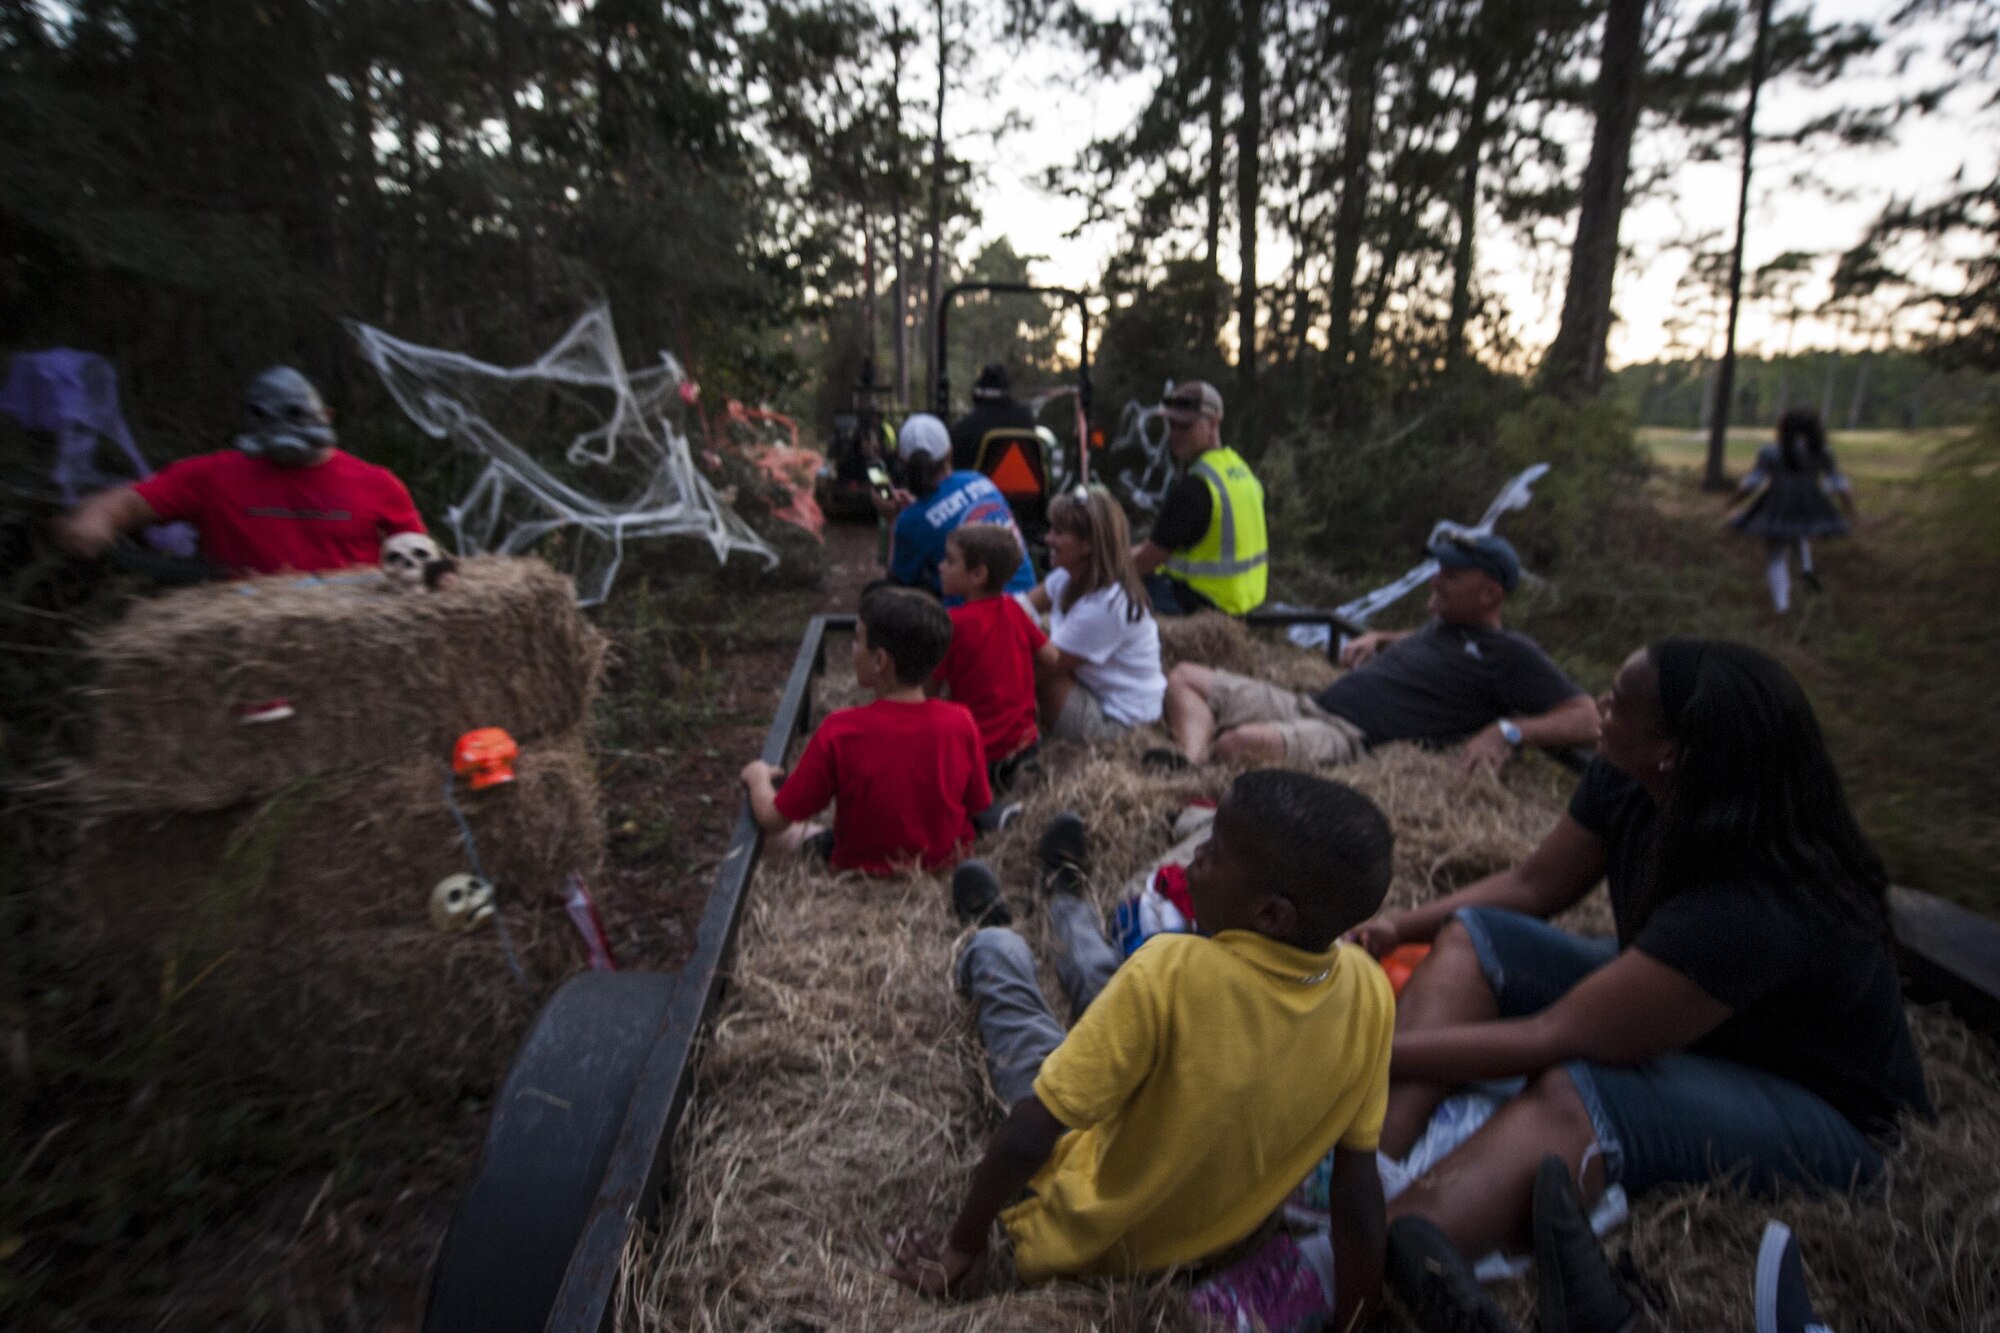 Air Commandos and their families ride the haunted hay ride during the Haunted Lakes Fall Festival at Hurlburt Field, Fla., Oct. 28, 2016. The hay ride took participants through a series of spooky displays. (U.S. Air Force photo by Airman 1st Class Joseph Pick)